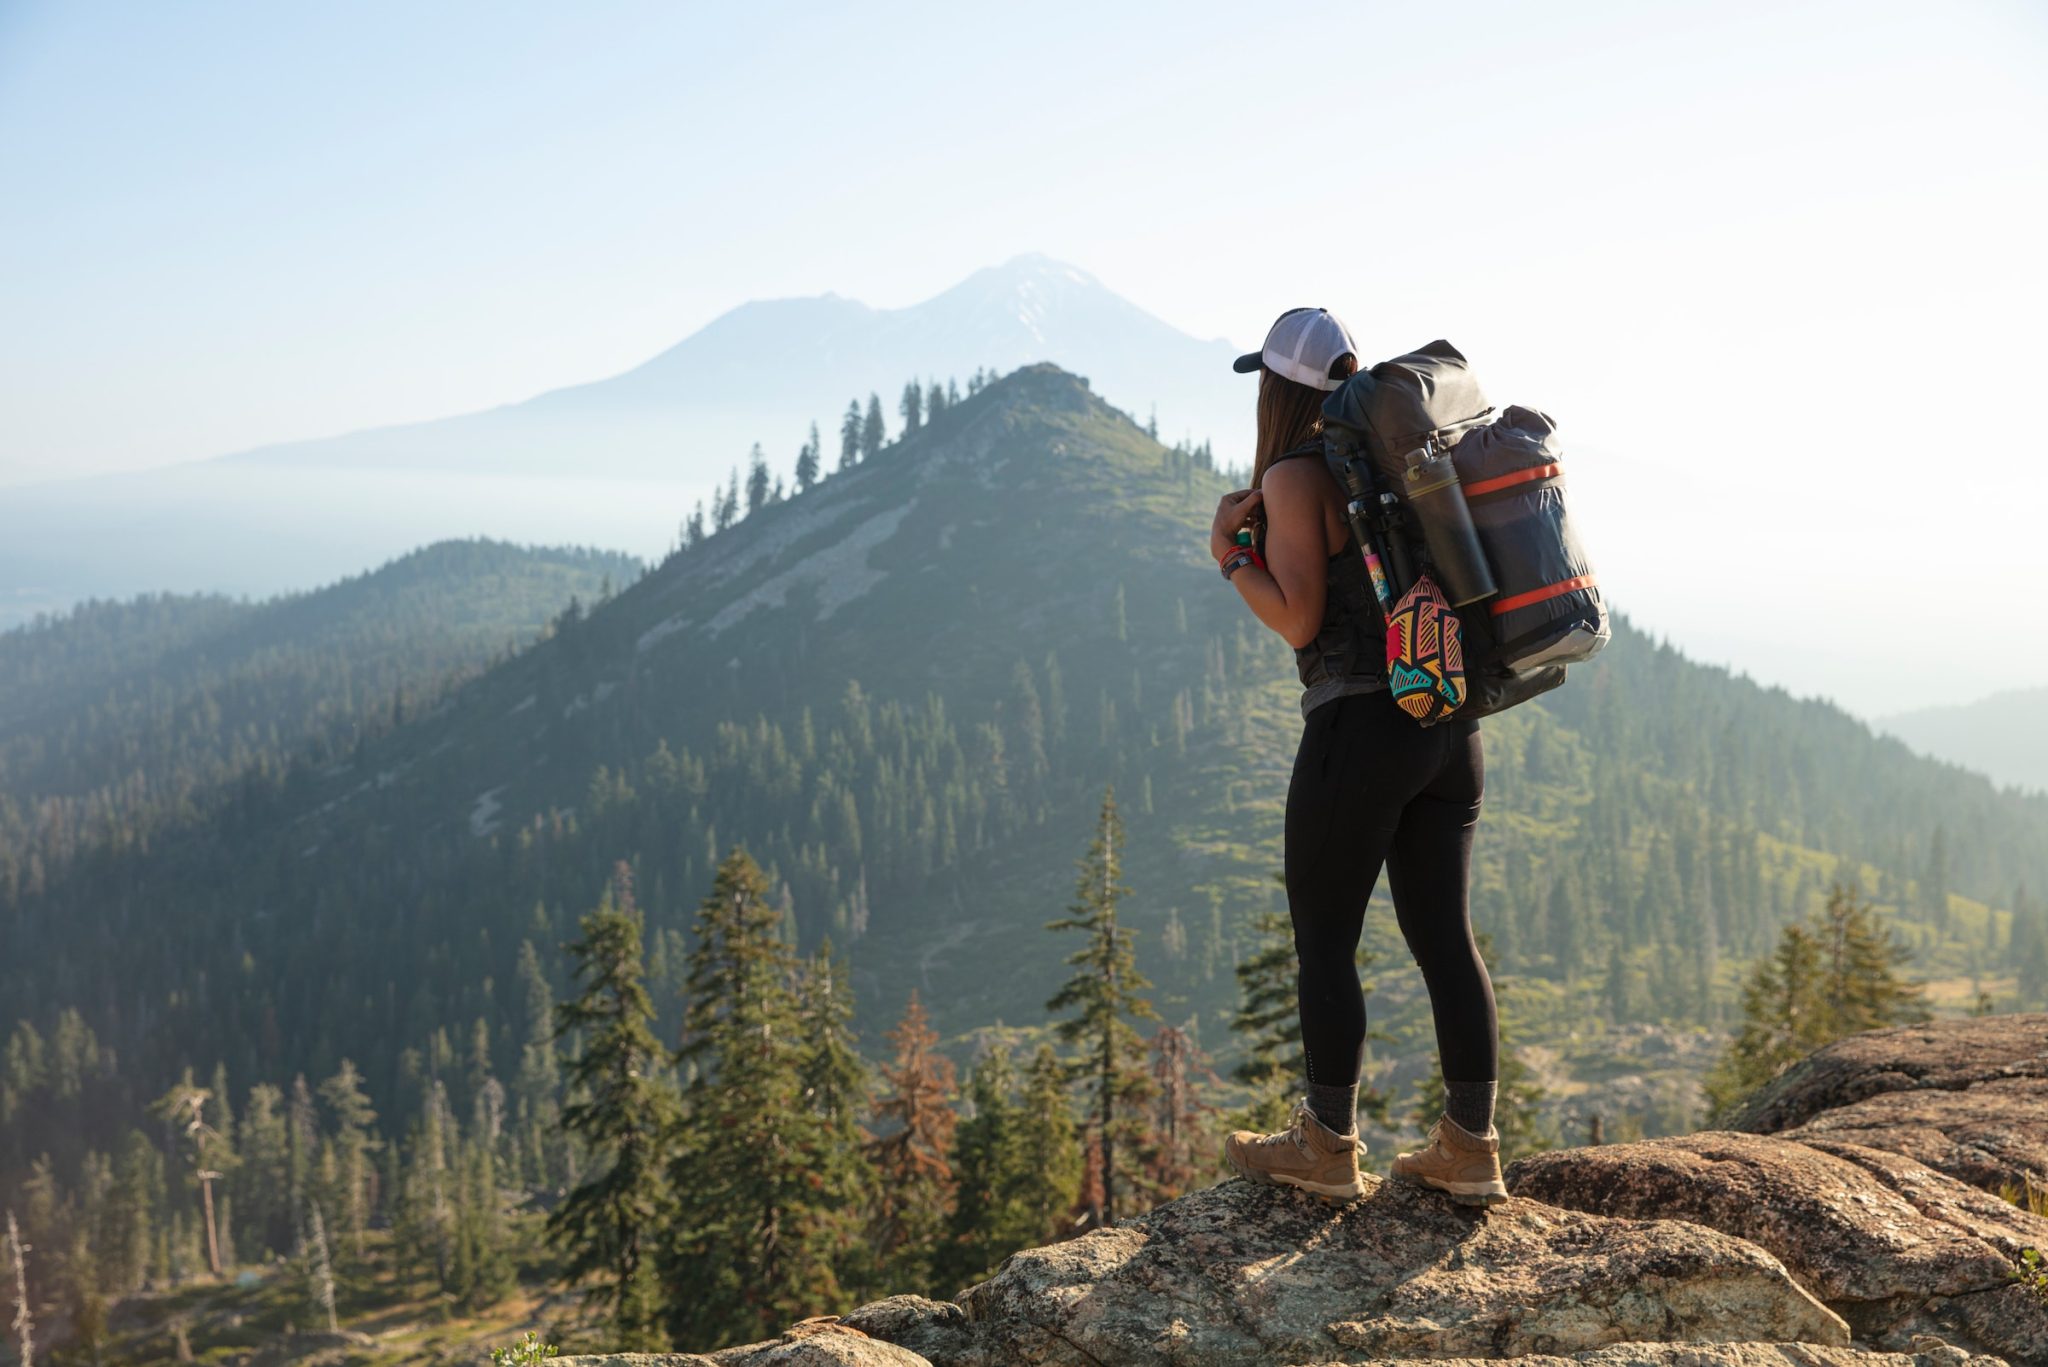 How to choose places to go hiking this summer